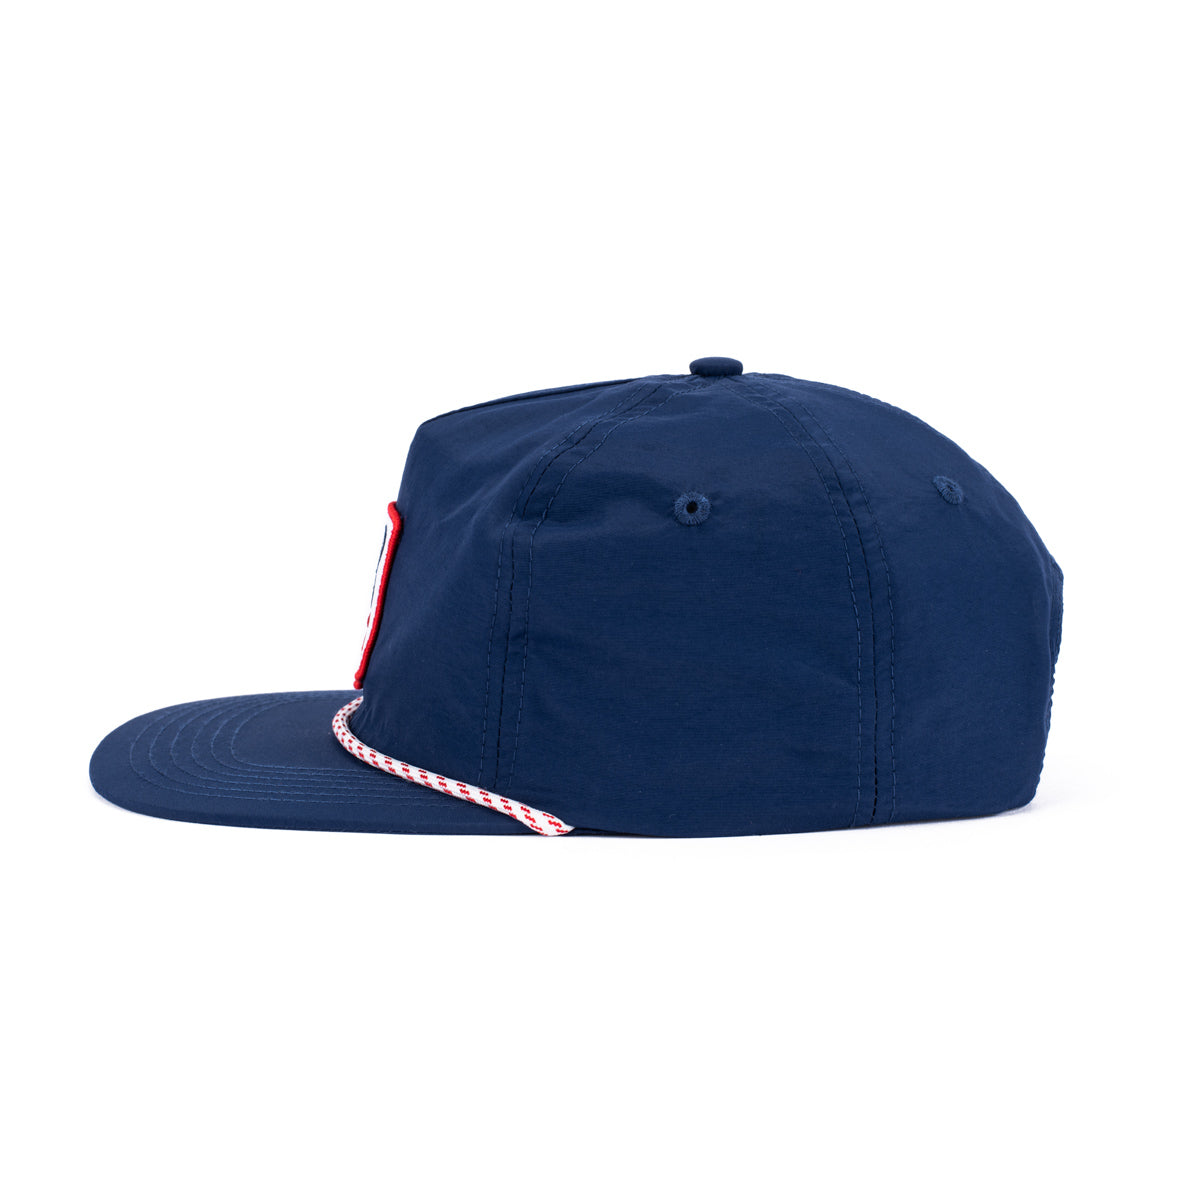 Barstool Golf Crossed Tees Nylon Rope Hat-Hats-Fore Play-Navy-One Size-Barstool Sports